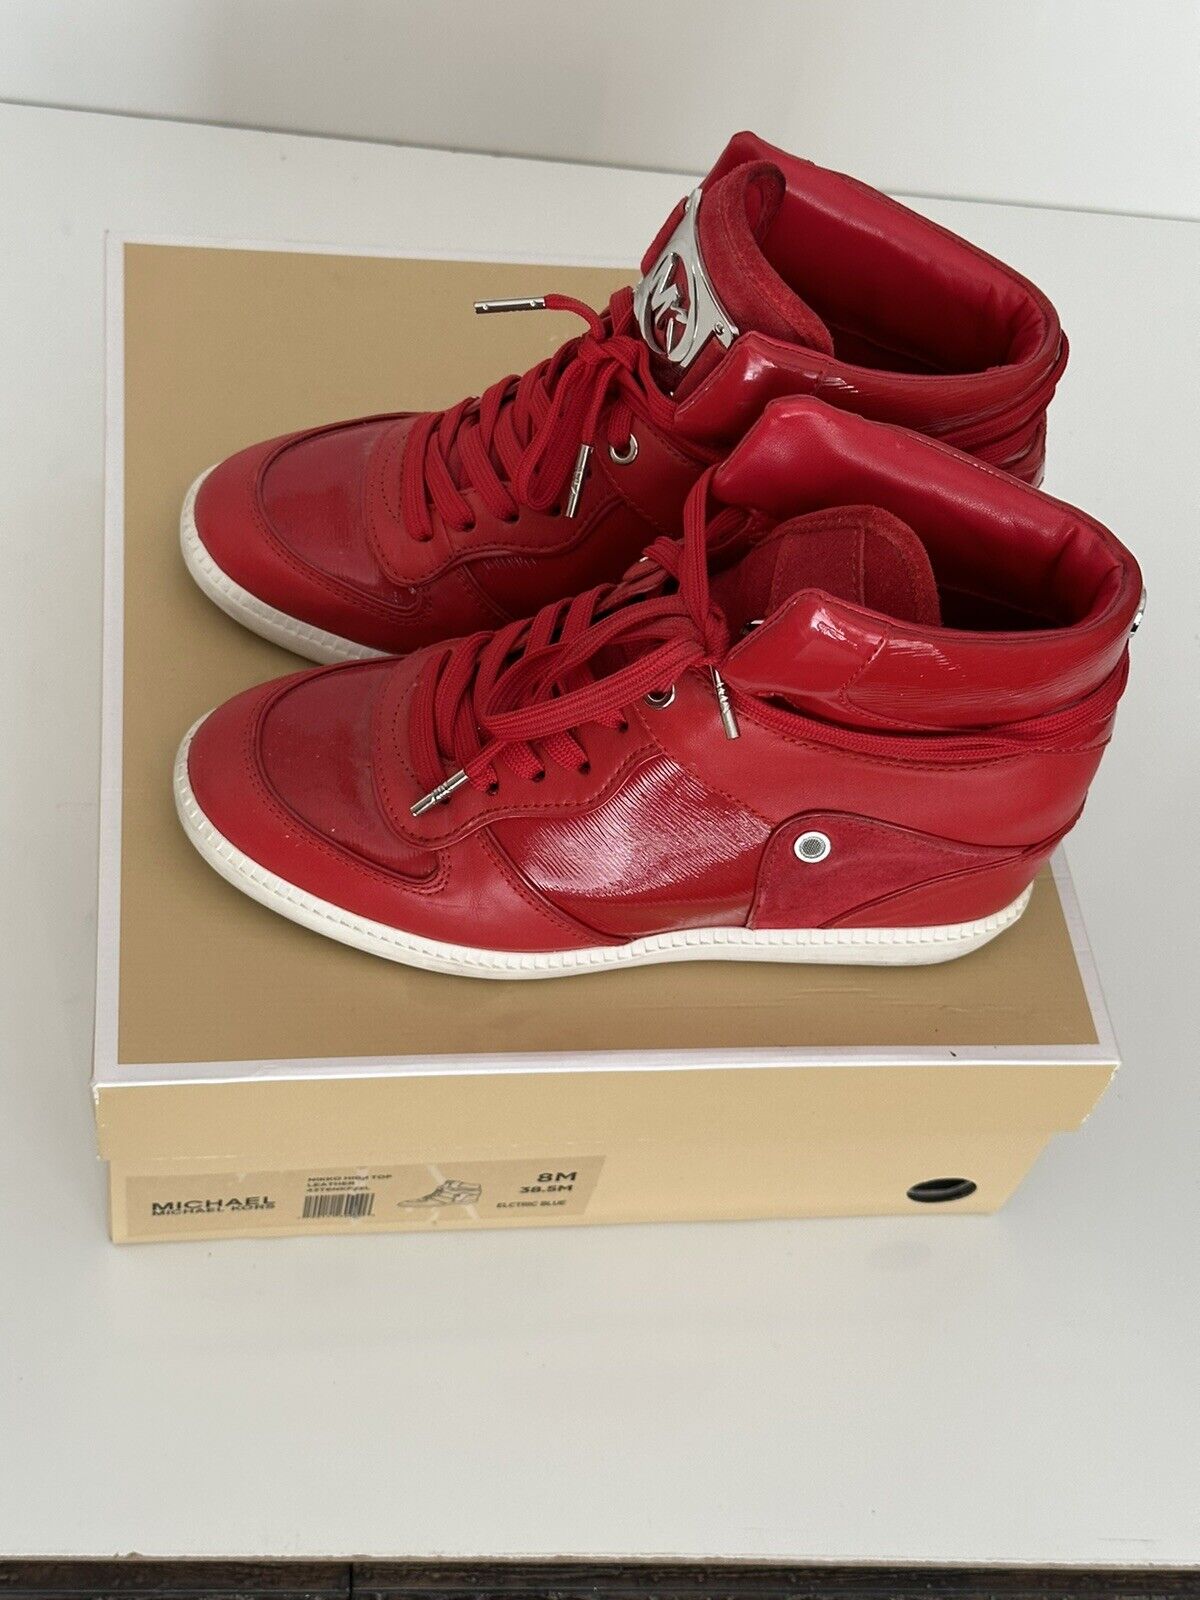 Michael Kors Nikko High Top Leather Sneakers Red Size 8 US (38.5 Euro)